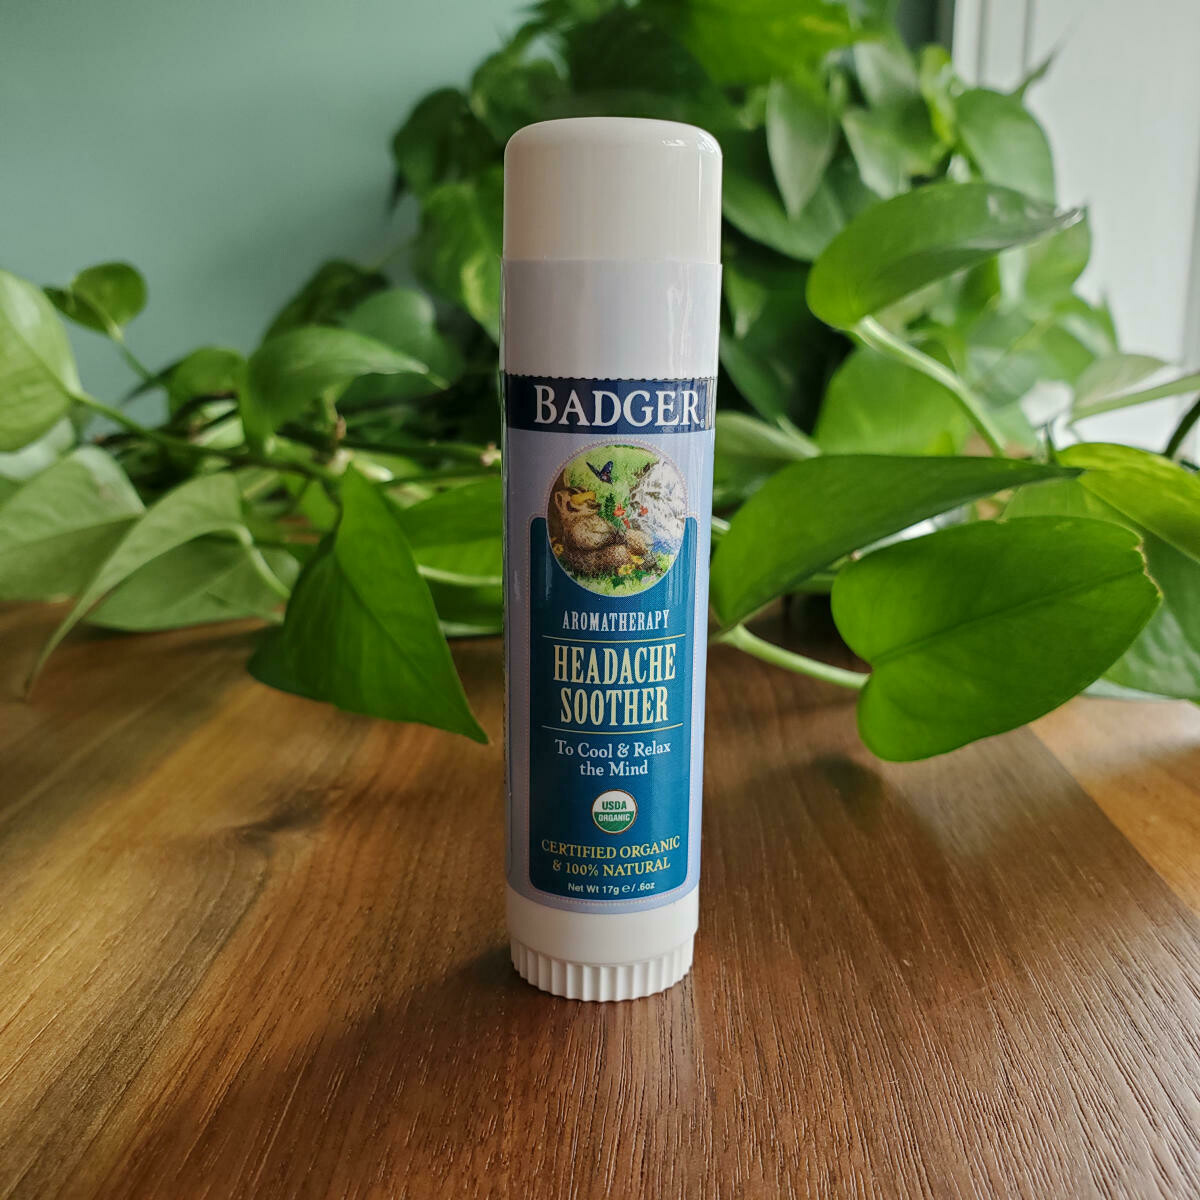 Badger Headache Soother Aromatherapy